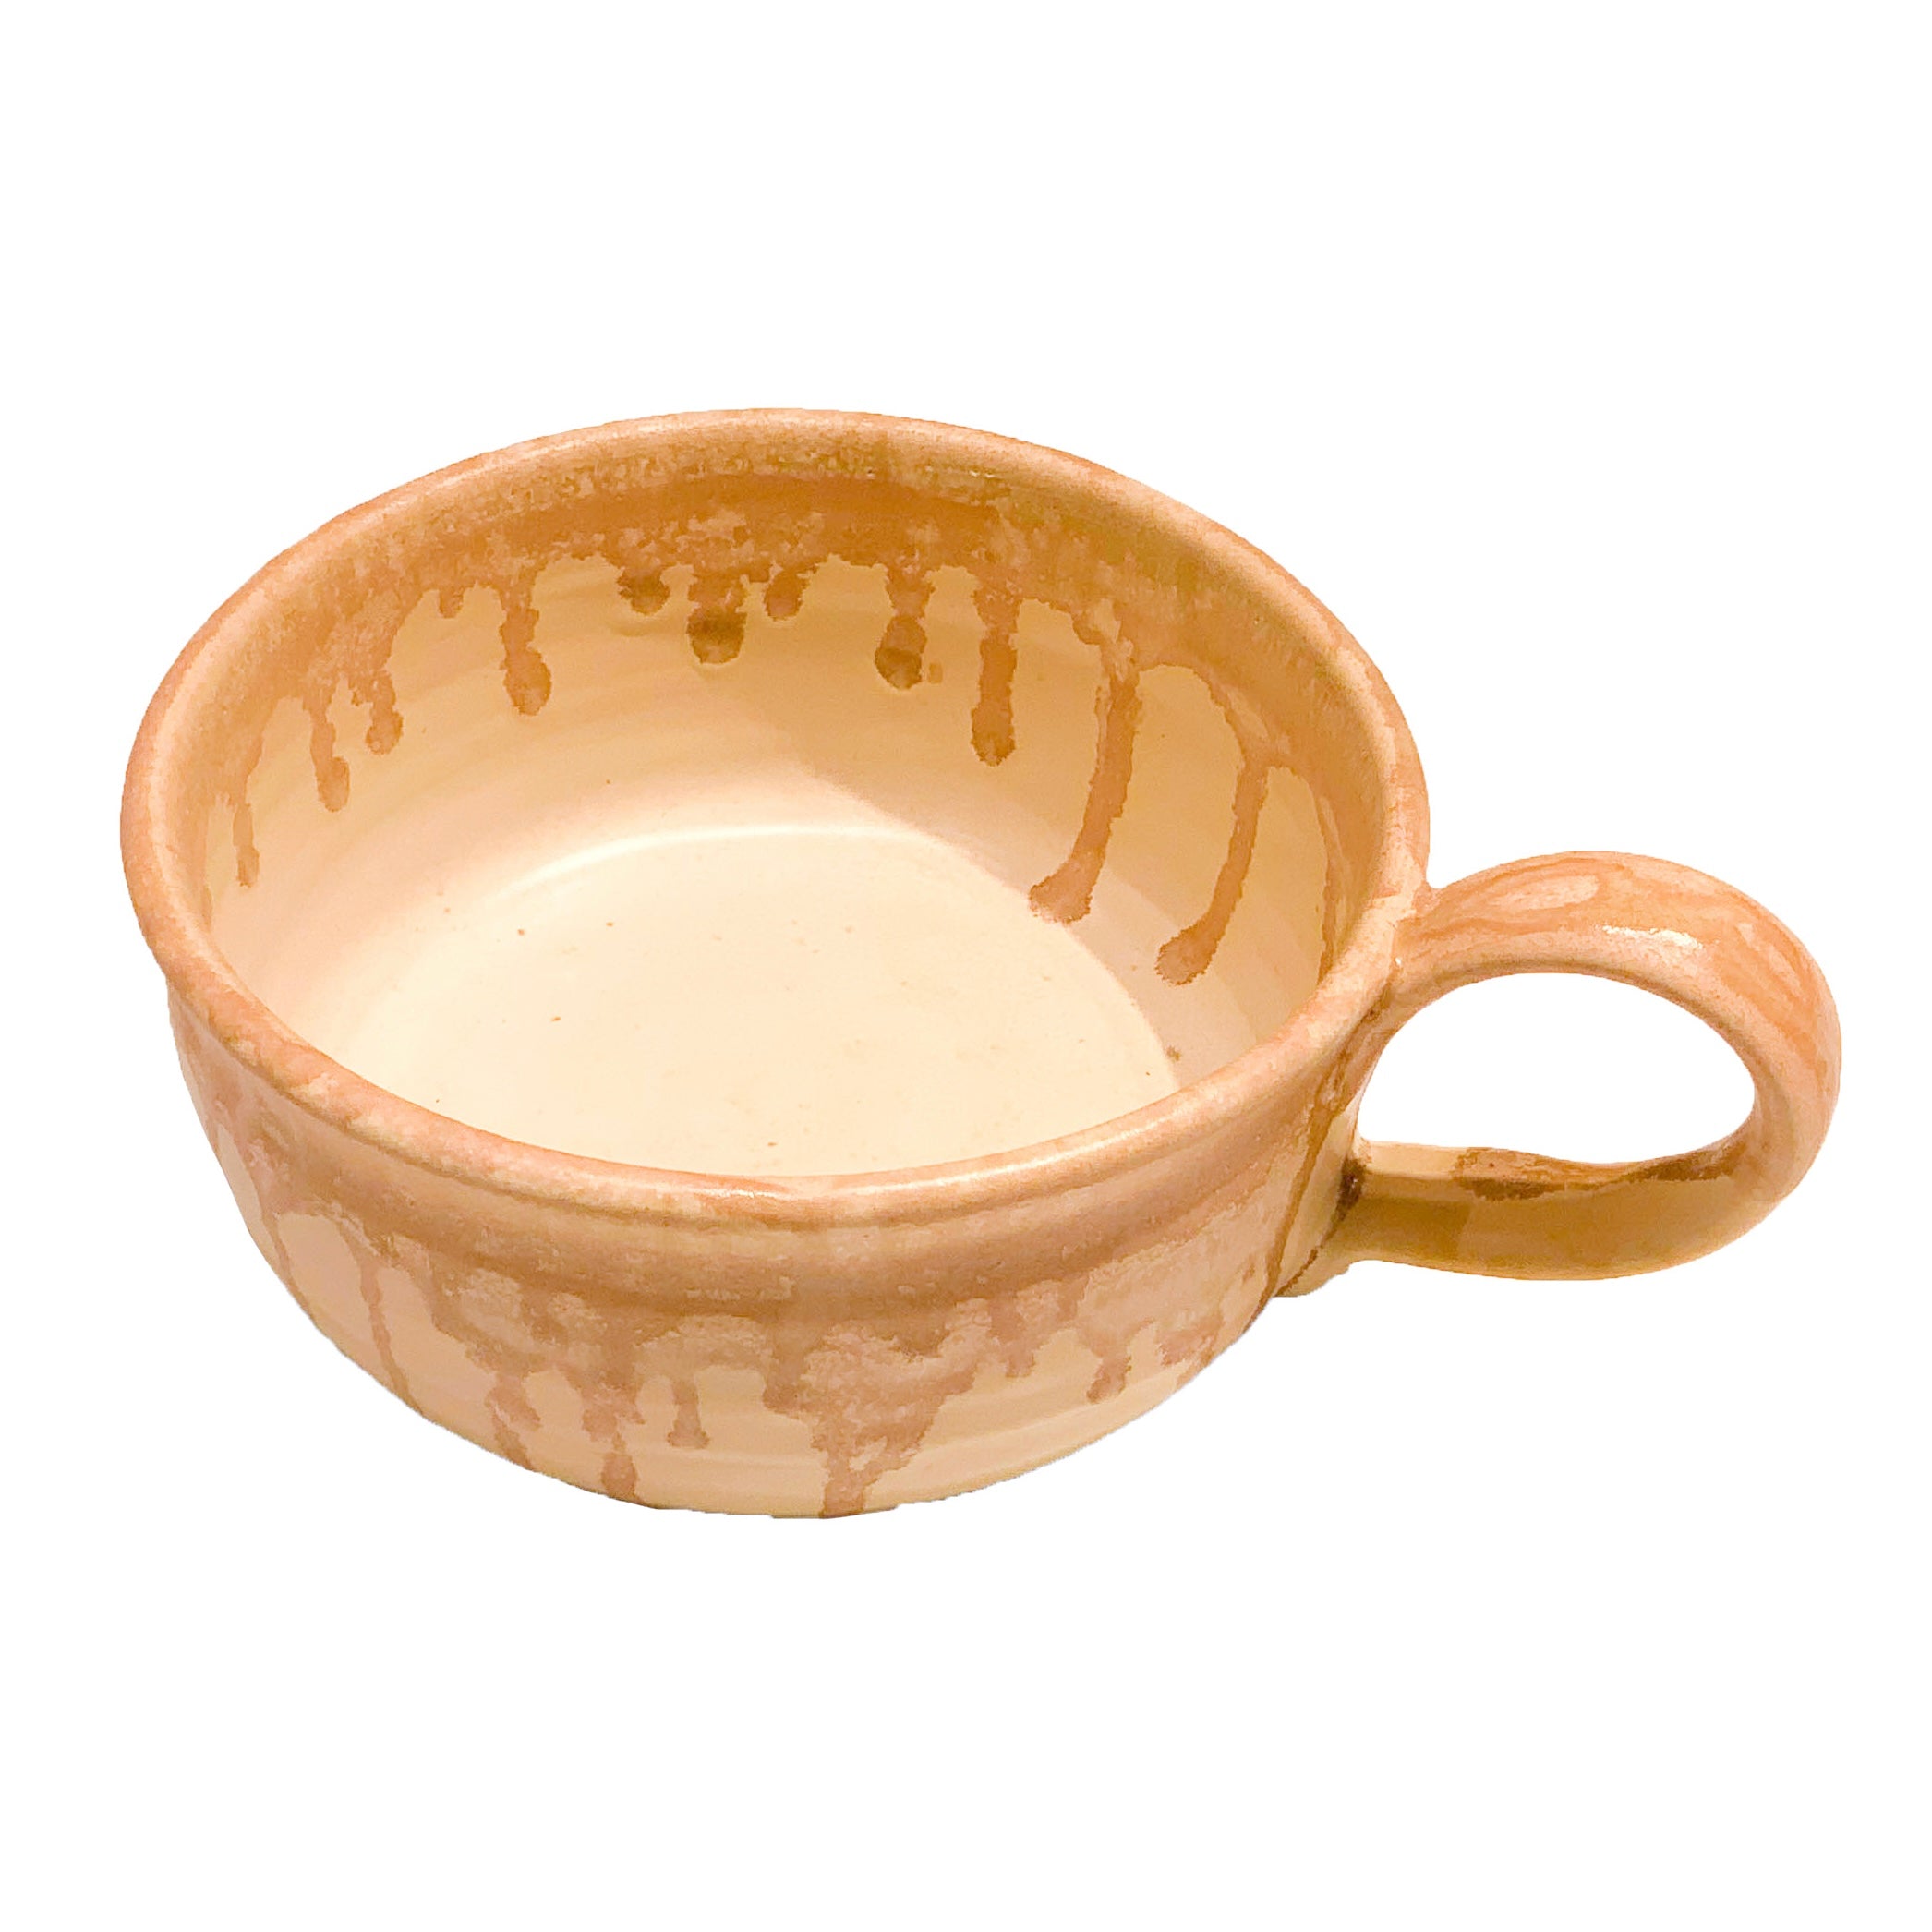 SOUP BOWL WITH HANDLE - PALE YELLOW WITH CREAM DRIP